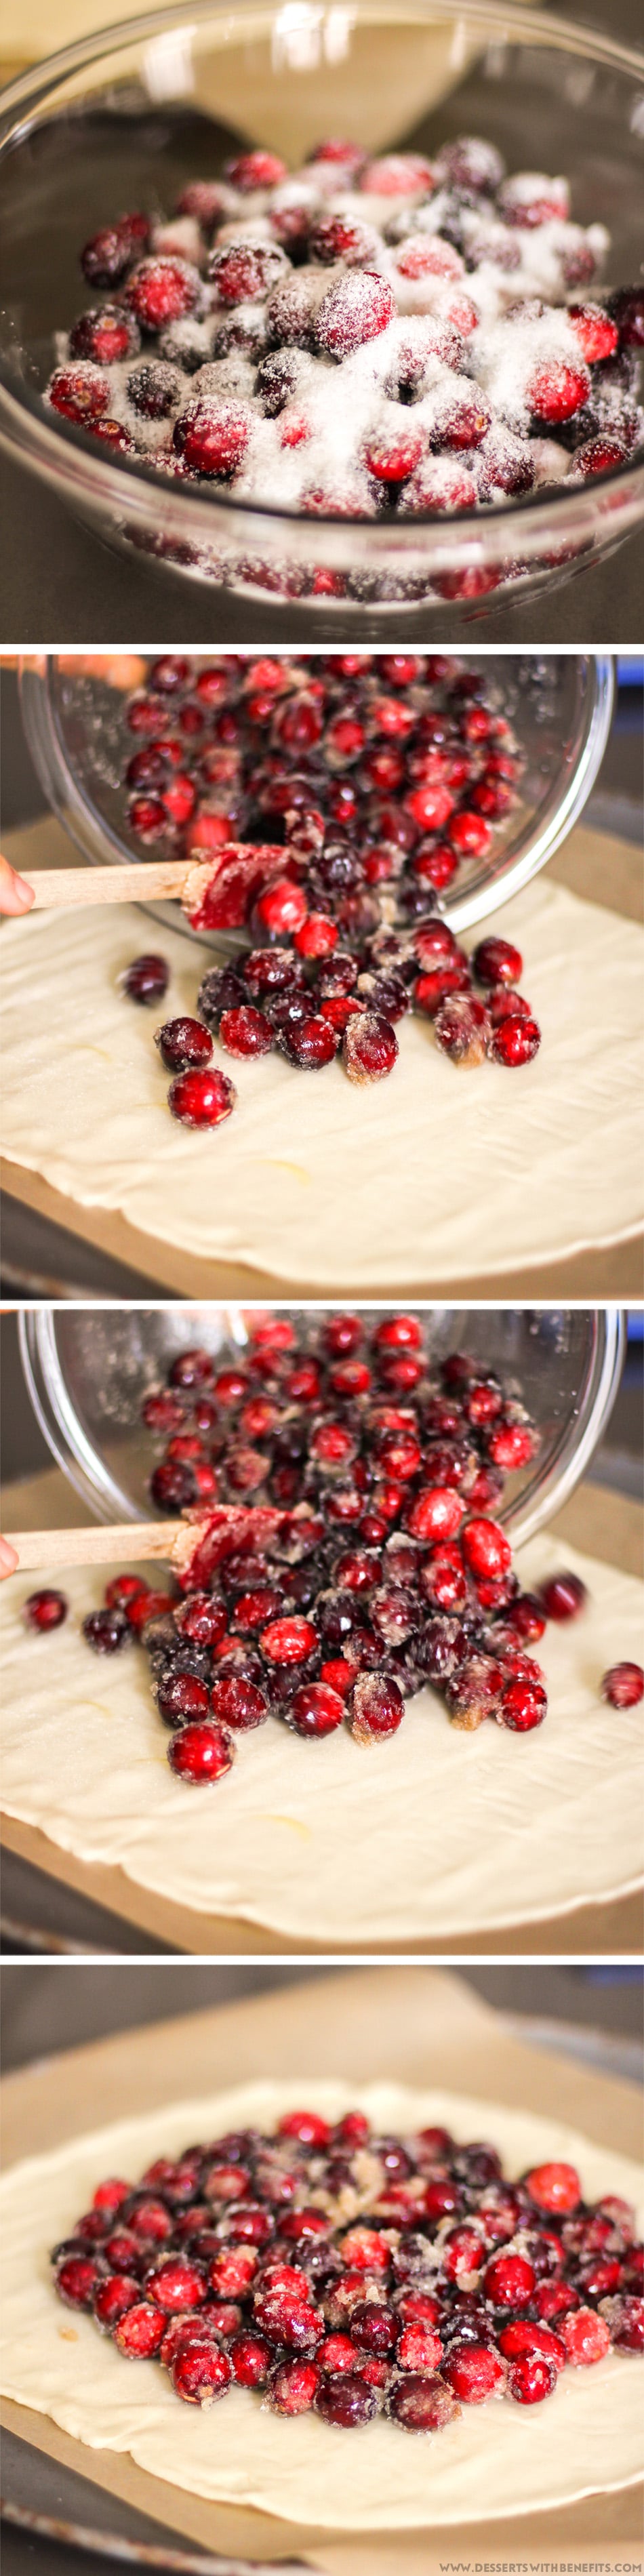 How to Make the World's EASIEST Galette! Quick and Lazy Guilt-Free Cranberry Galette Recipe (low calorie, low fat, low sugar) - Healthy Dessert Recipes at Desserts with Benefits